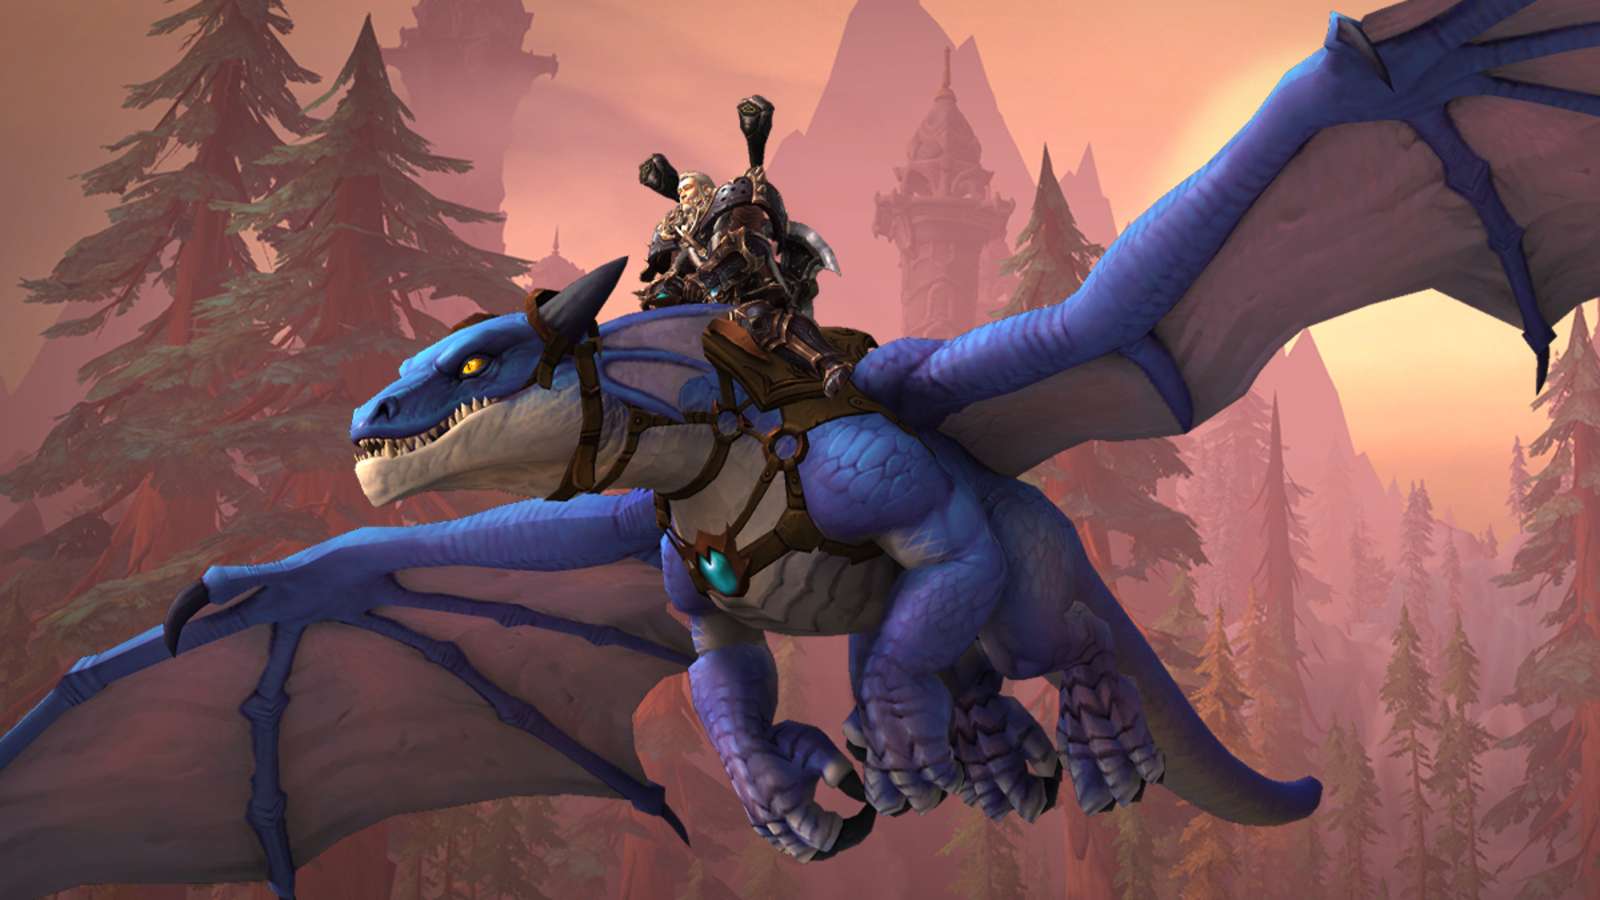 A player with high Gearscore rides a dragon in World of Warcraft